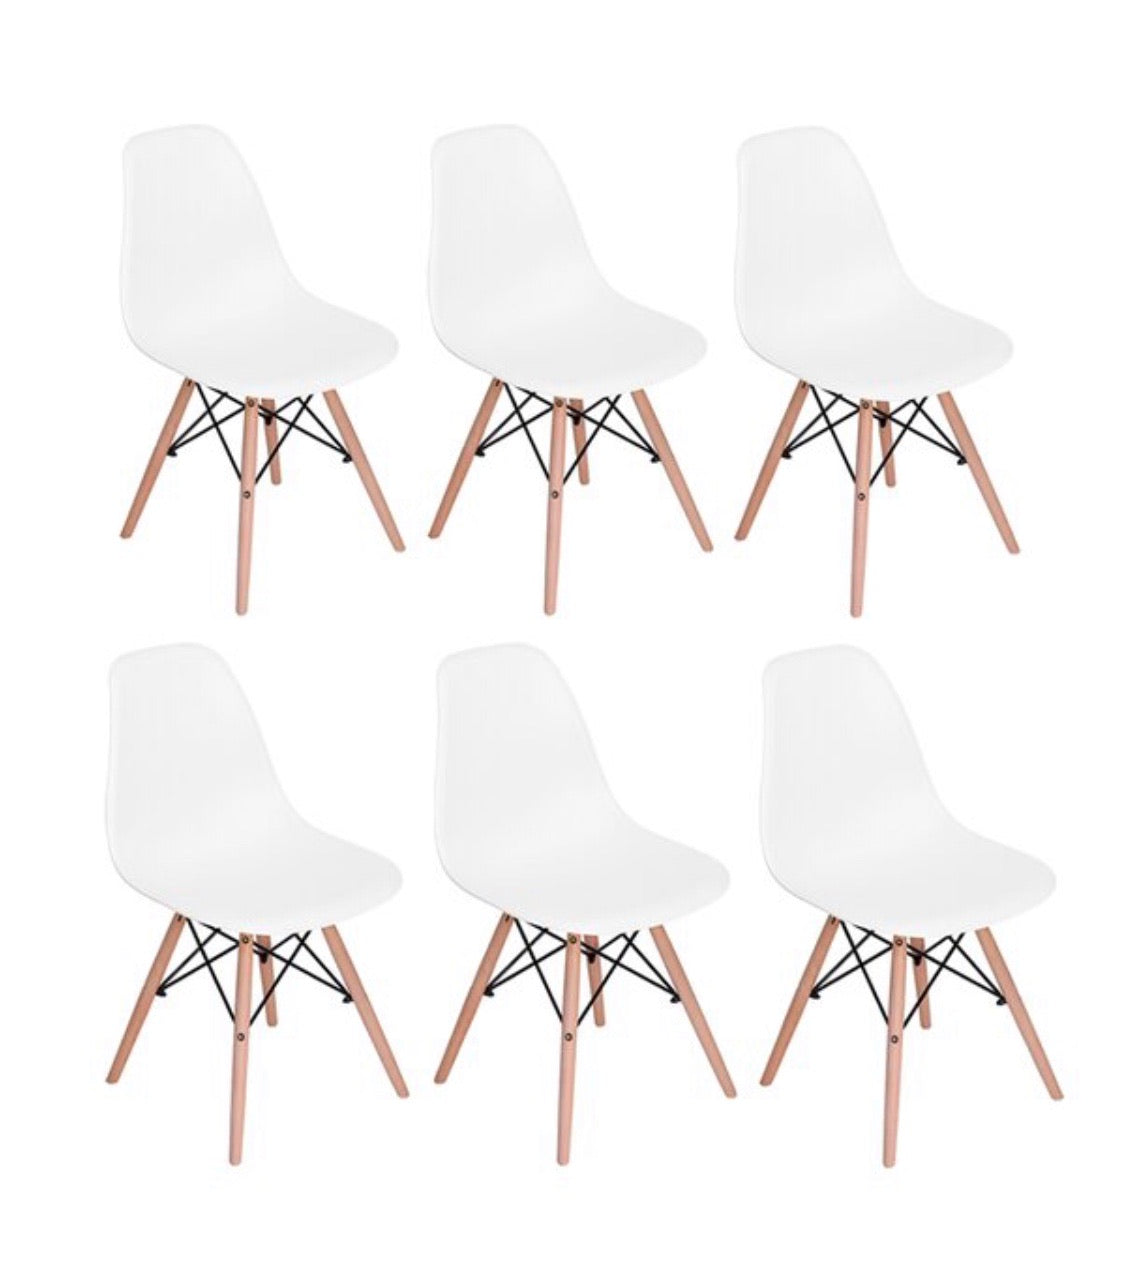 Bowlin Side Chair in White-Set of 6 #5529